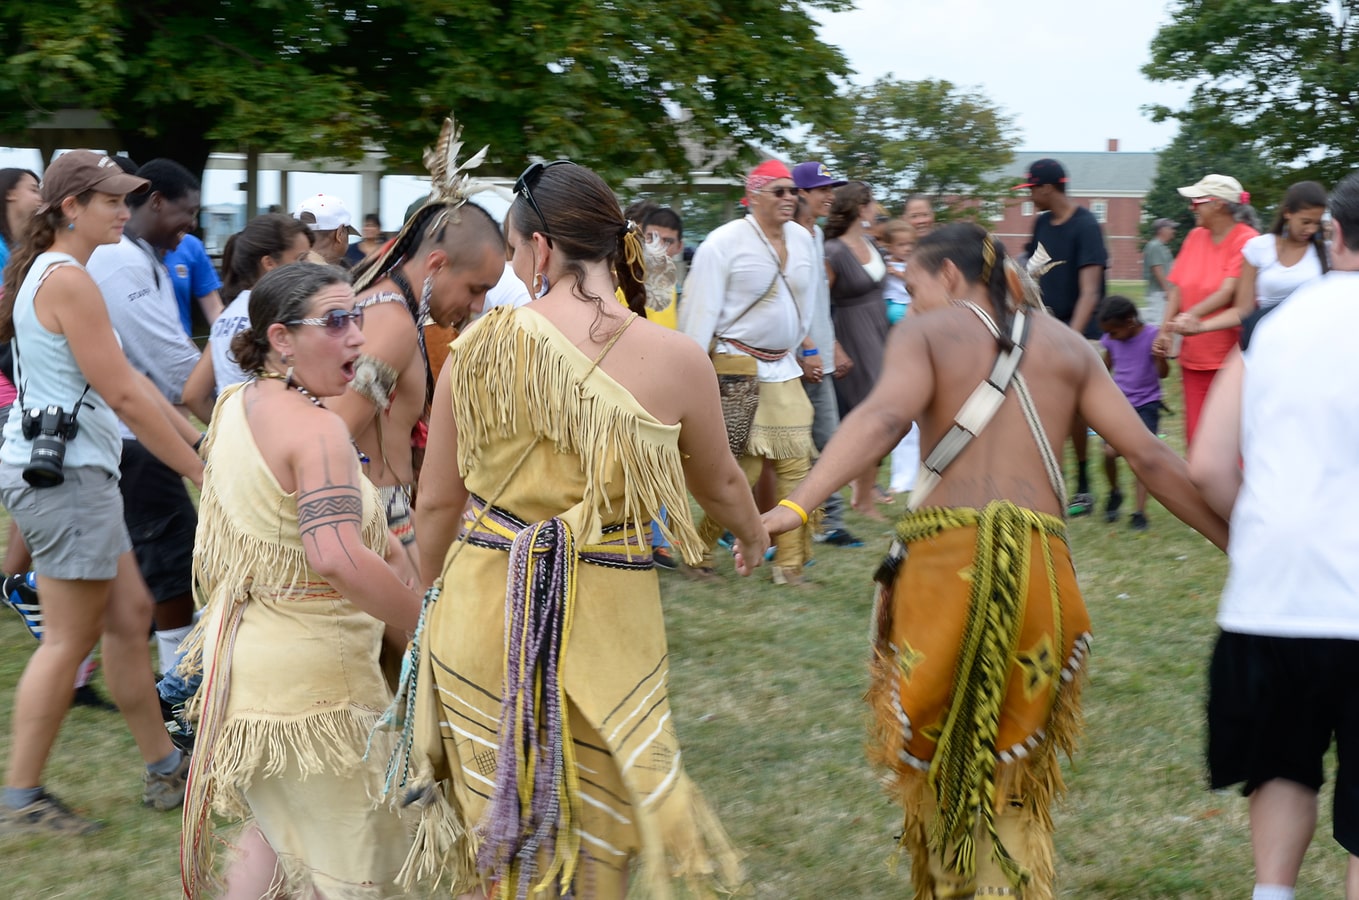 Group demonstrating a tribal dance with visitors